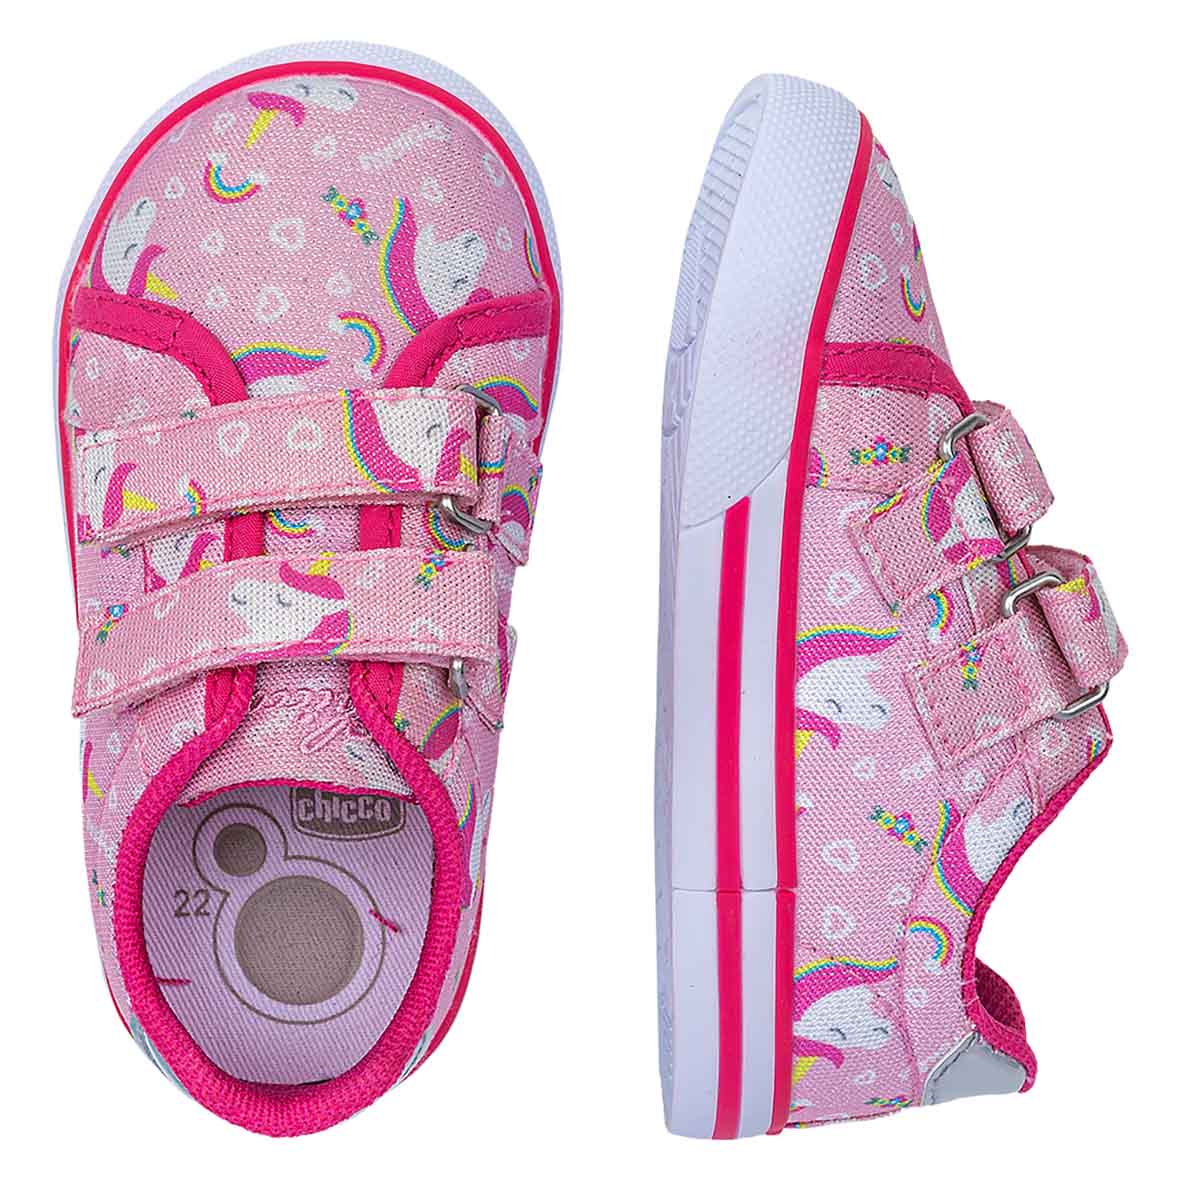 Chicco sneaker fany - Chicco